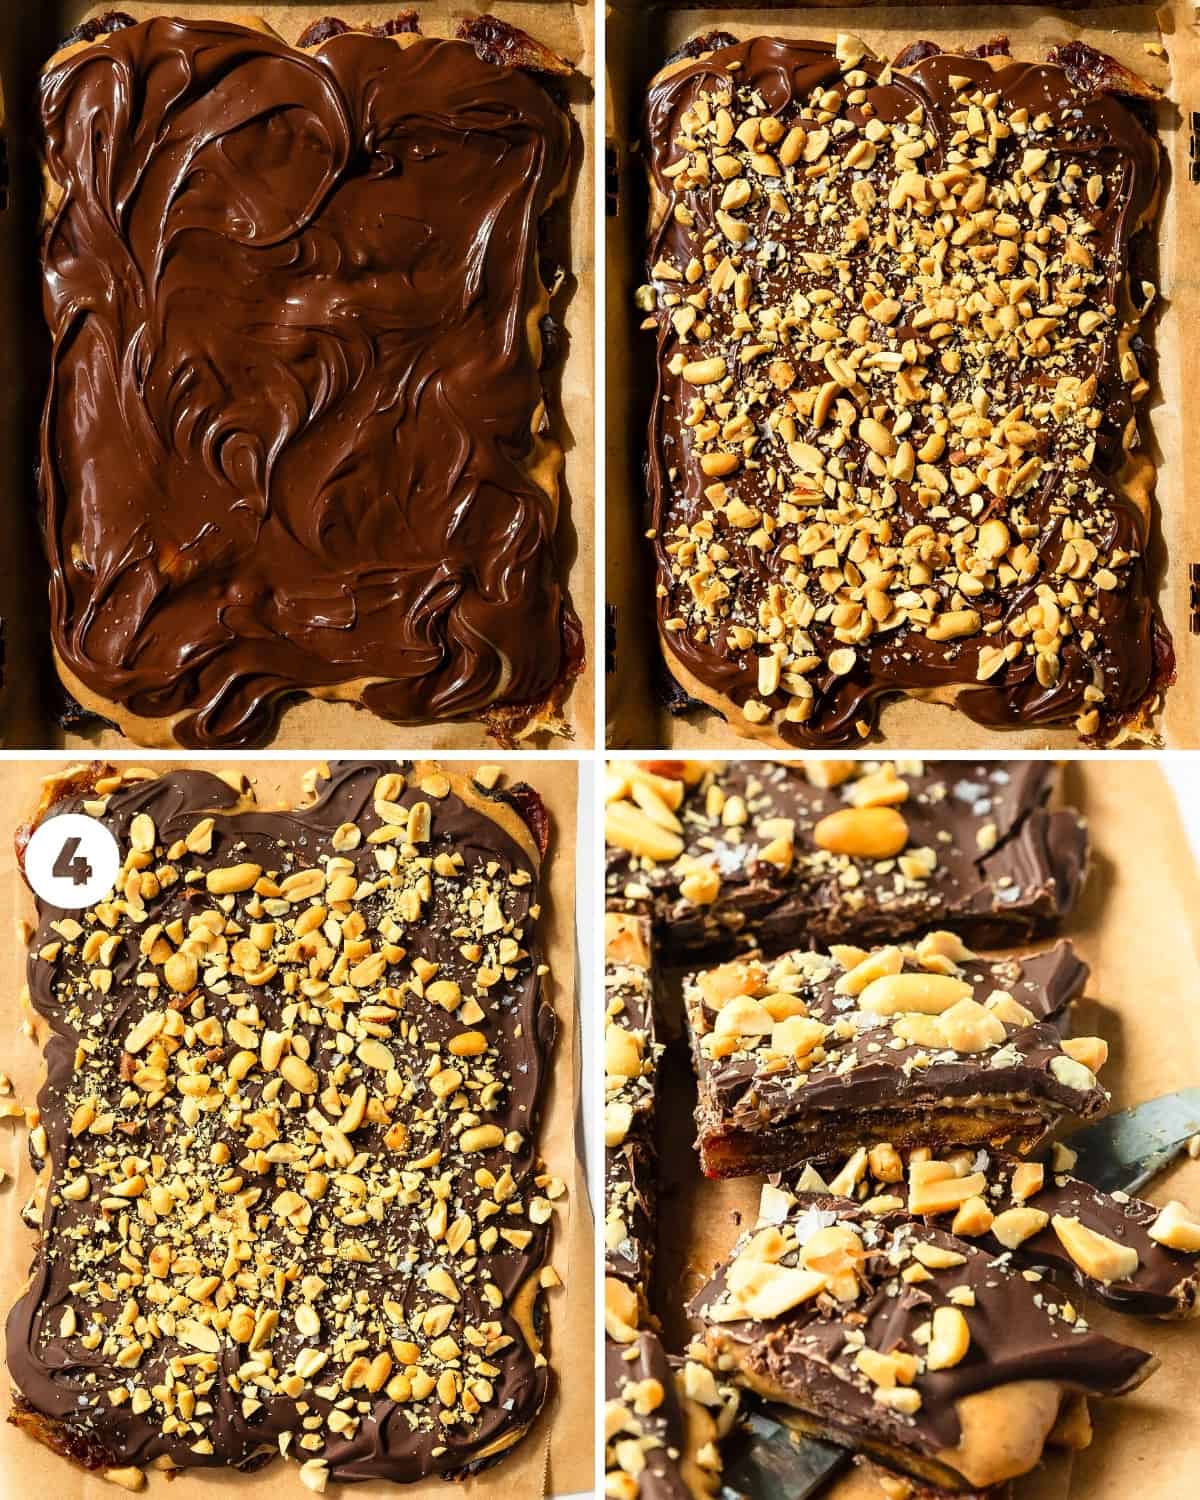 Transfer the snickers date bark to the fridge for 1 hour or the freezer for about 20 - 30 minutes to chill and set. Once the snickers crunch bar is set, remove the bark from the fridge or freezer, use a sharp knife to cut the bar into your desired number and sized pieces. This healthy snickers candy bark is best enjoyed served from the fridge. 